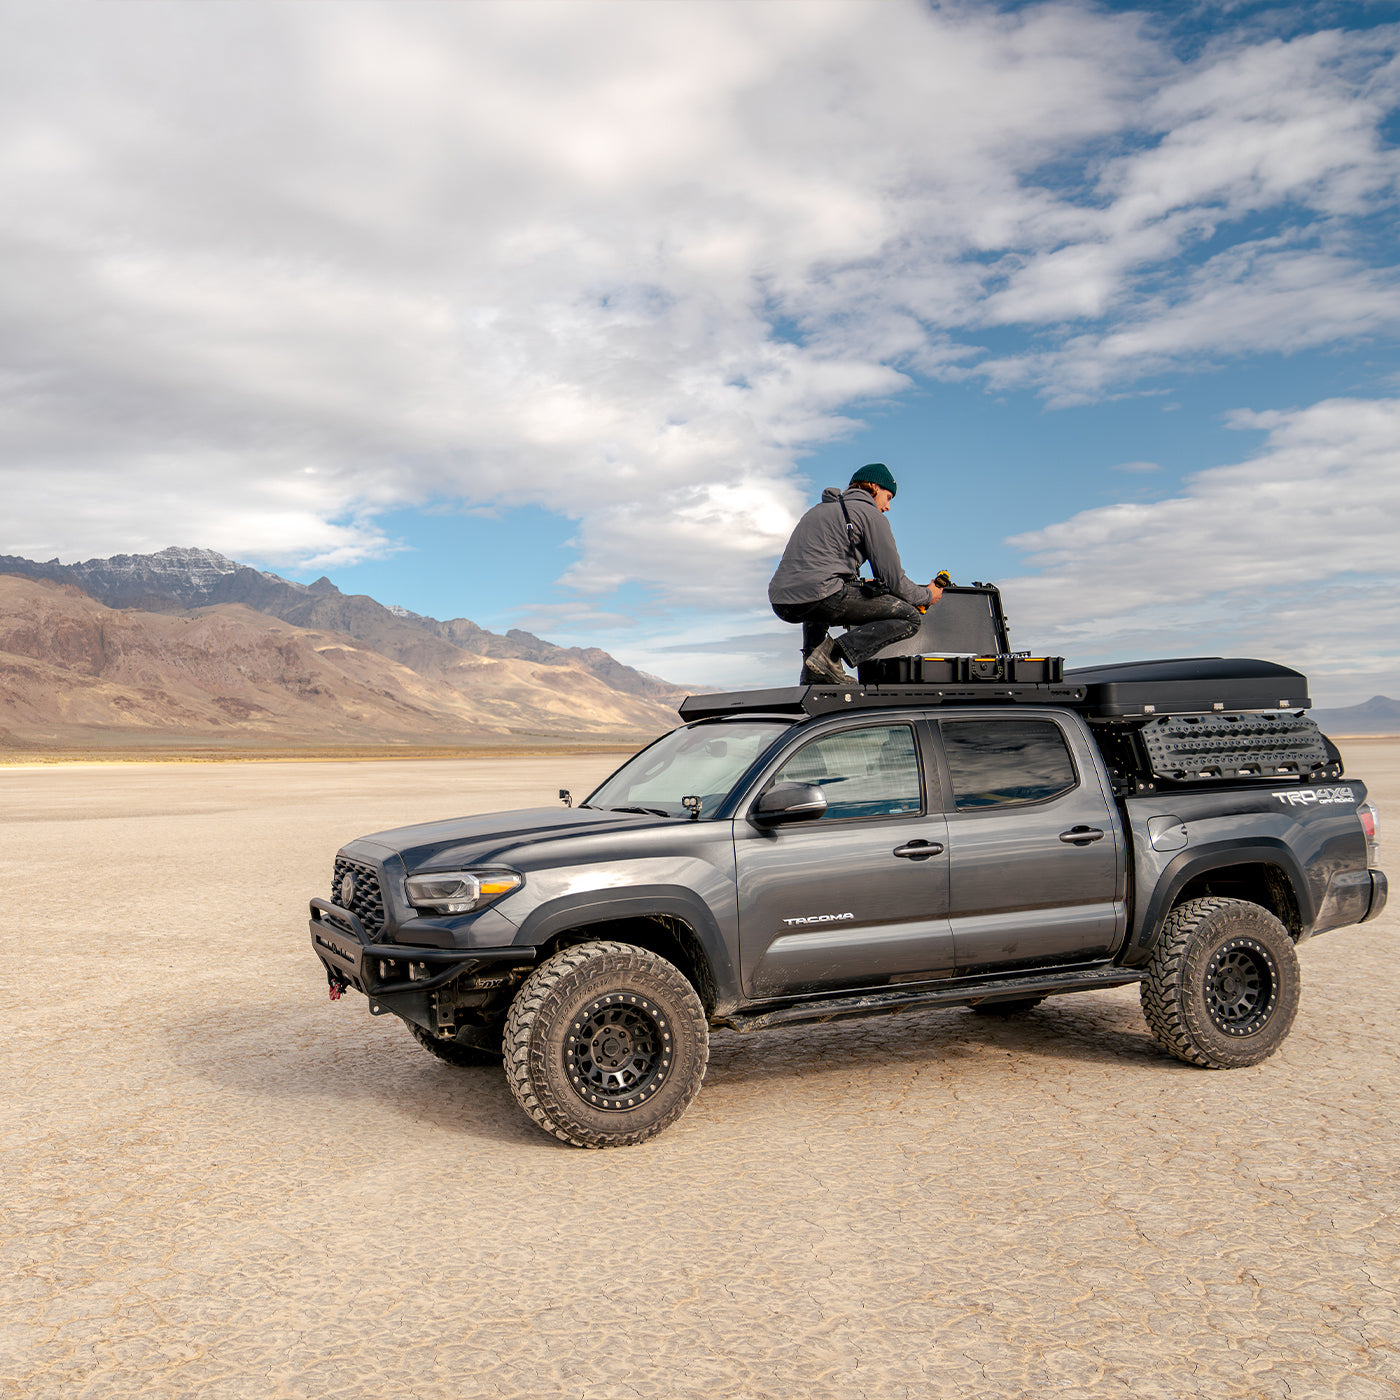 Raconteur Roof Rack (Toyota Tacoma | 2005 - Current)